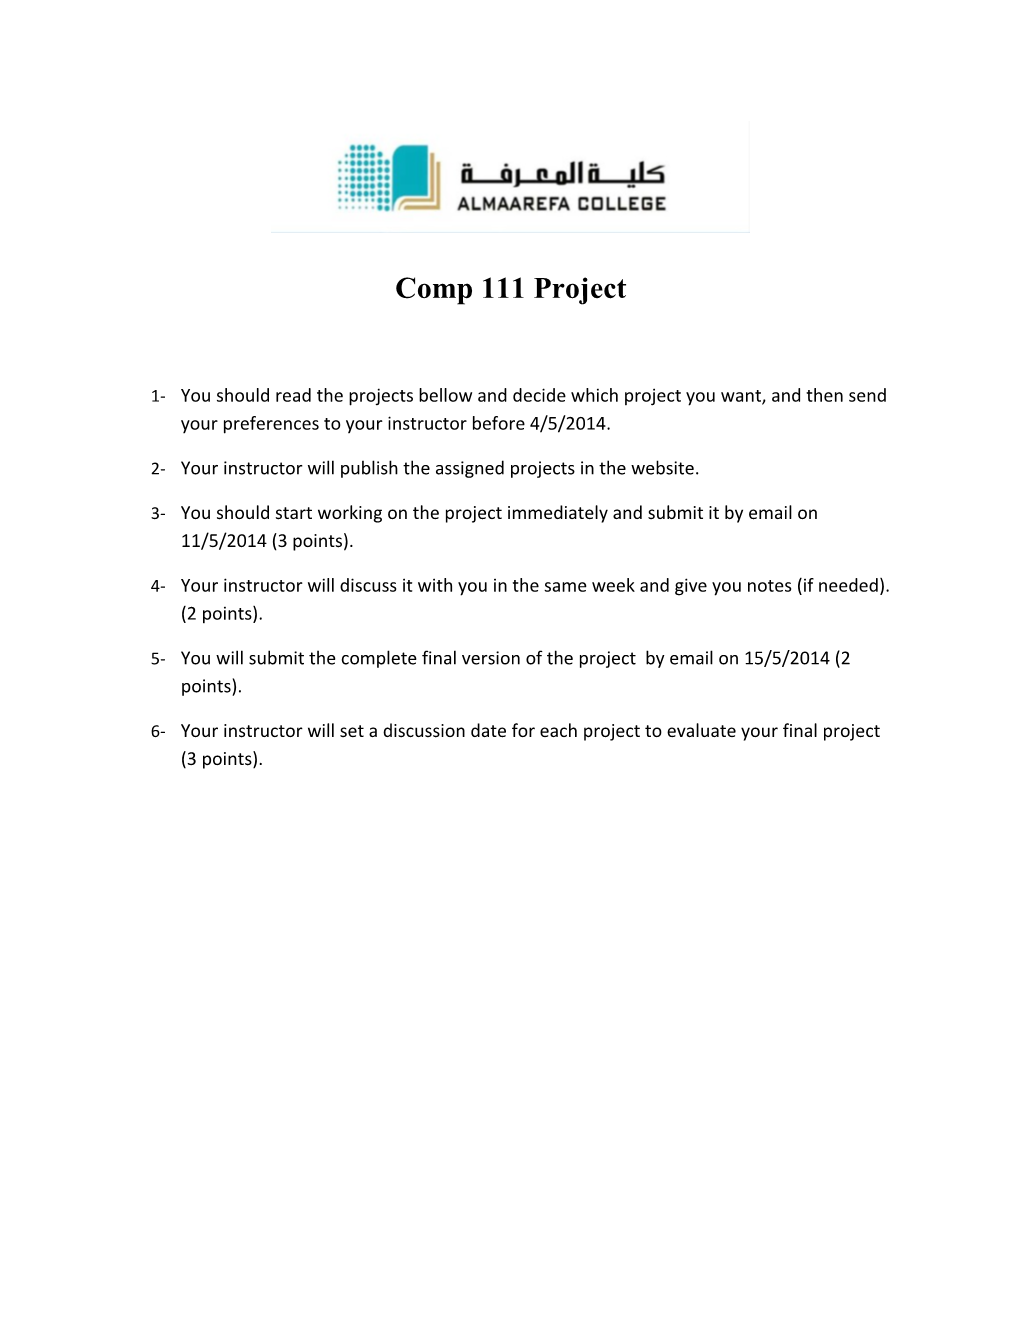 2- Your Instructor Will Publish the Assigned Projects in the Website